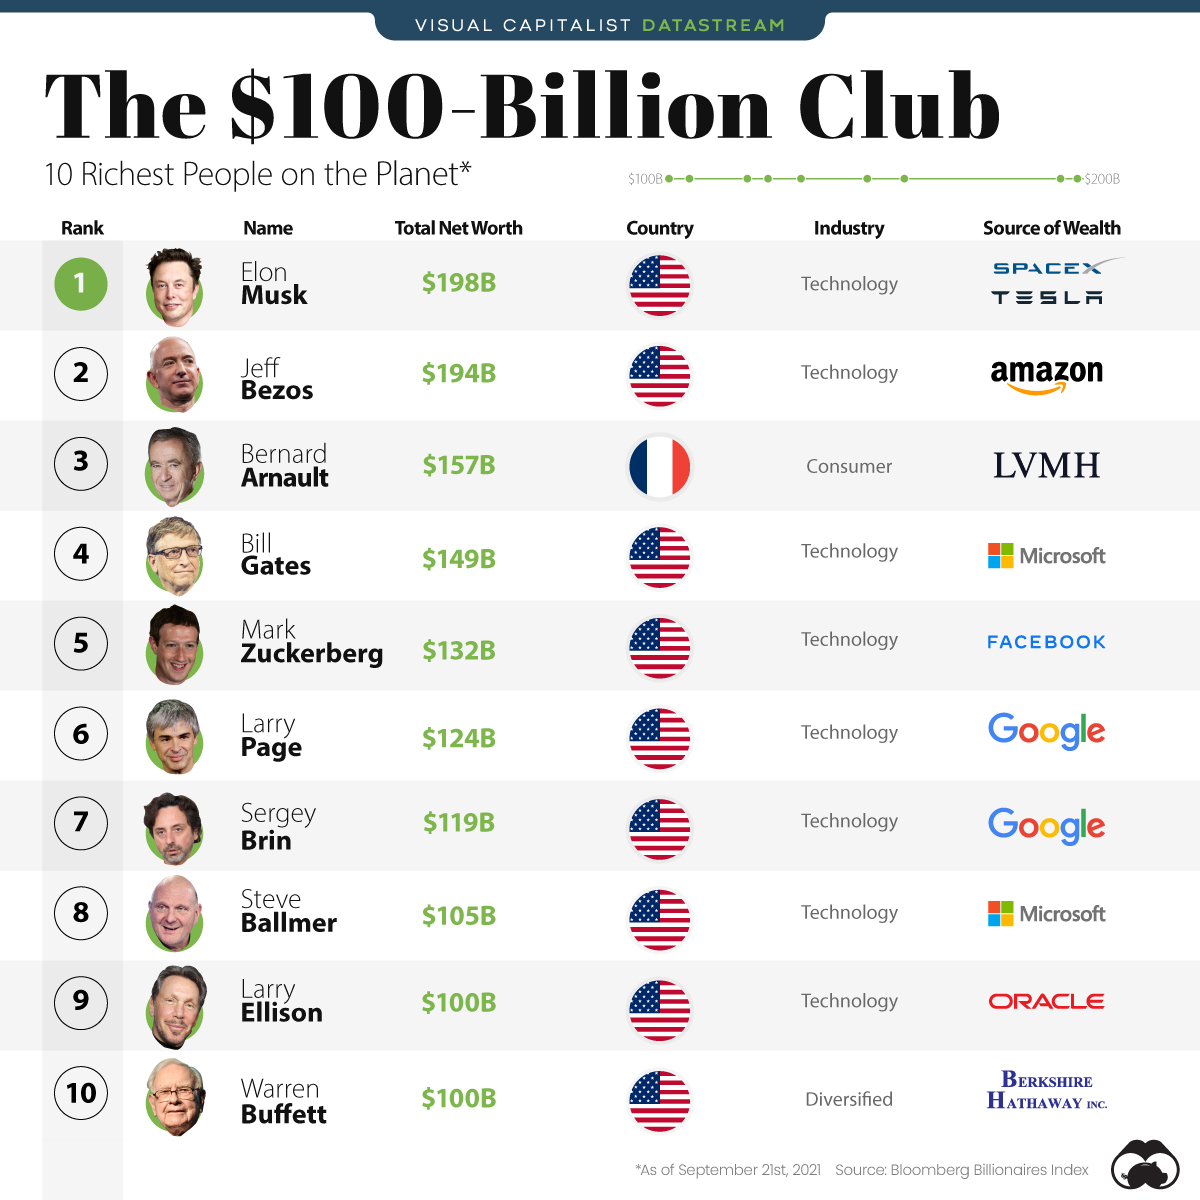  Top 10 Richest People on the Planet